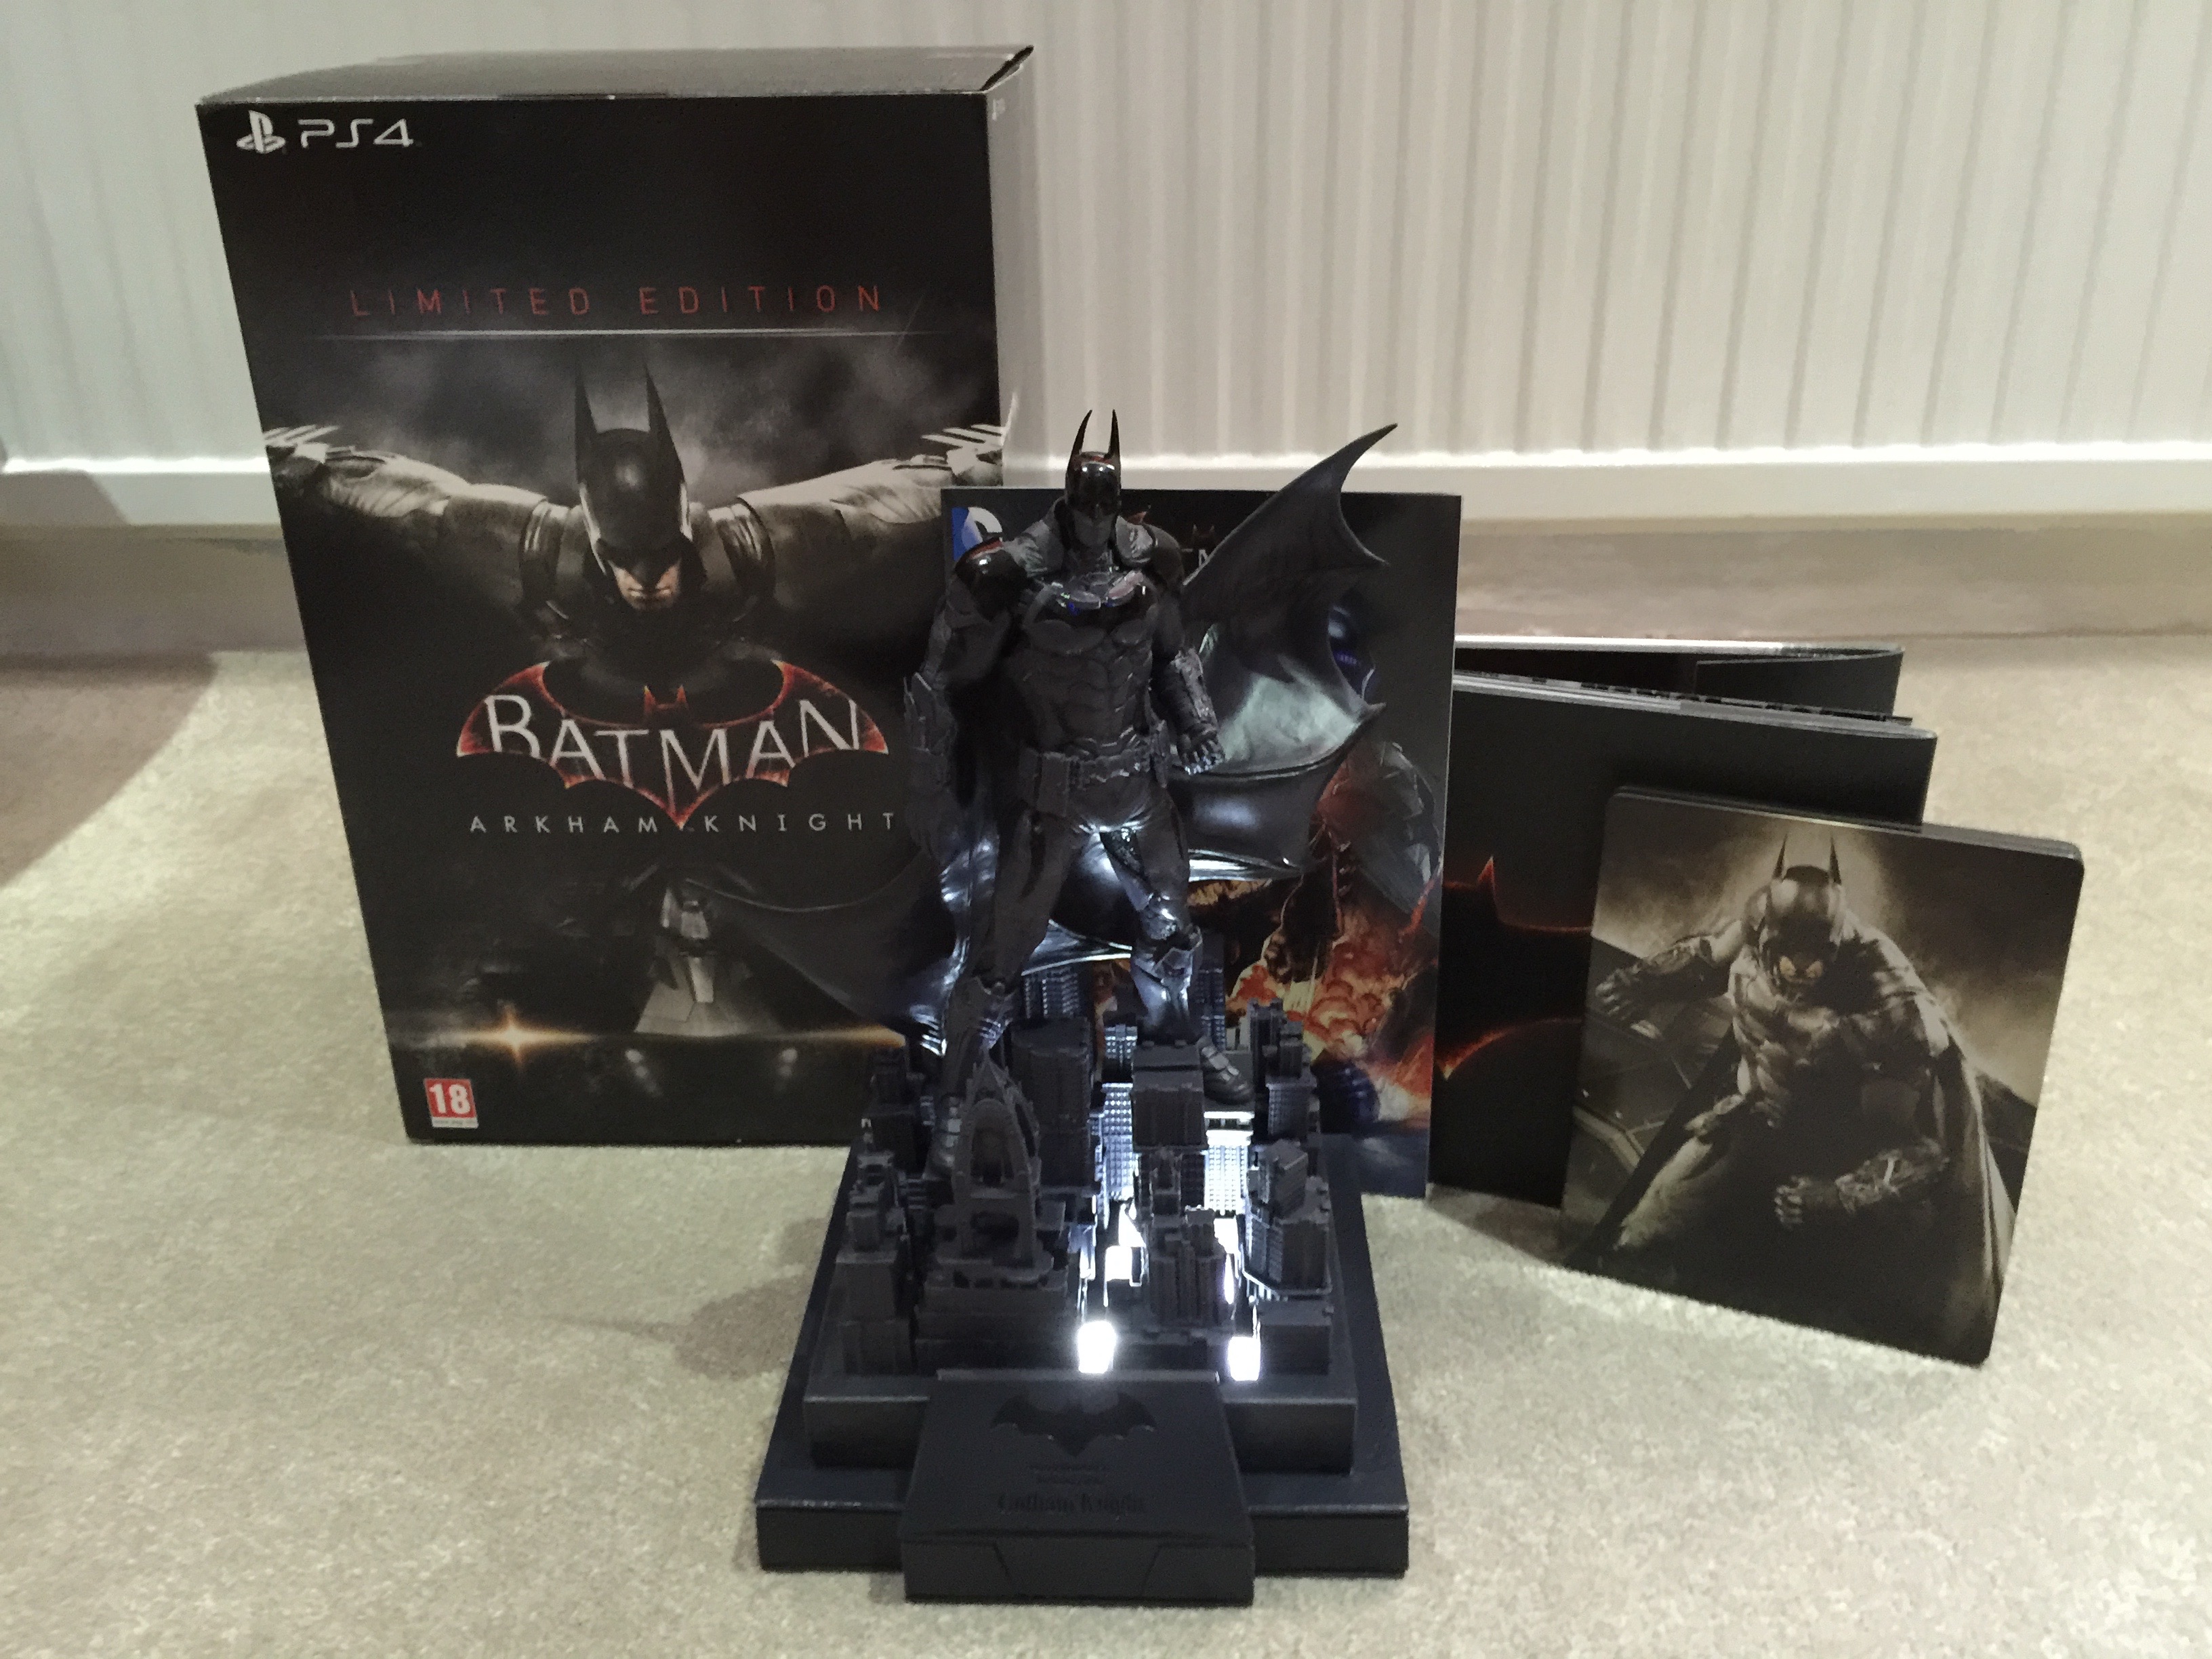 Batman Arkham Knight Collector's Edition | RUNNING, CYCLING AND TECH REVIEWS